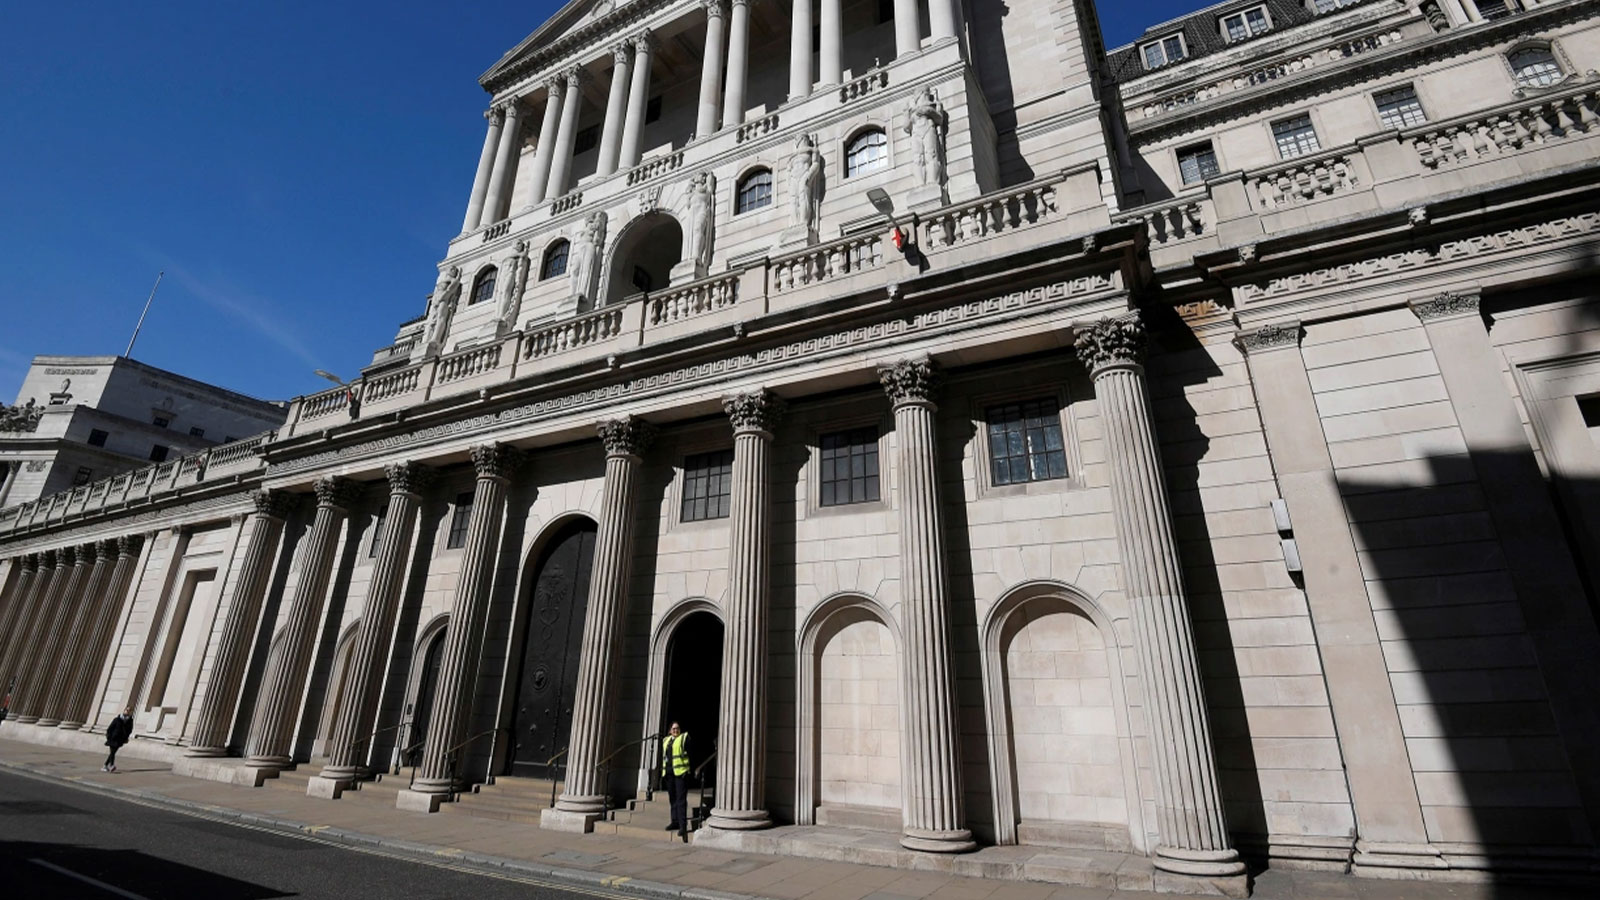 The Bank of England in central London.